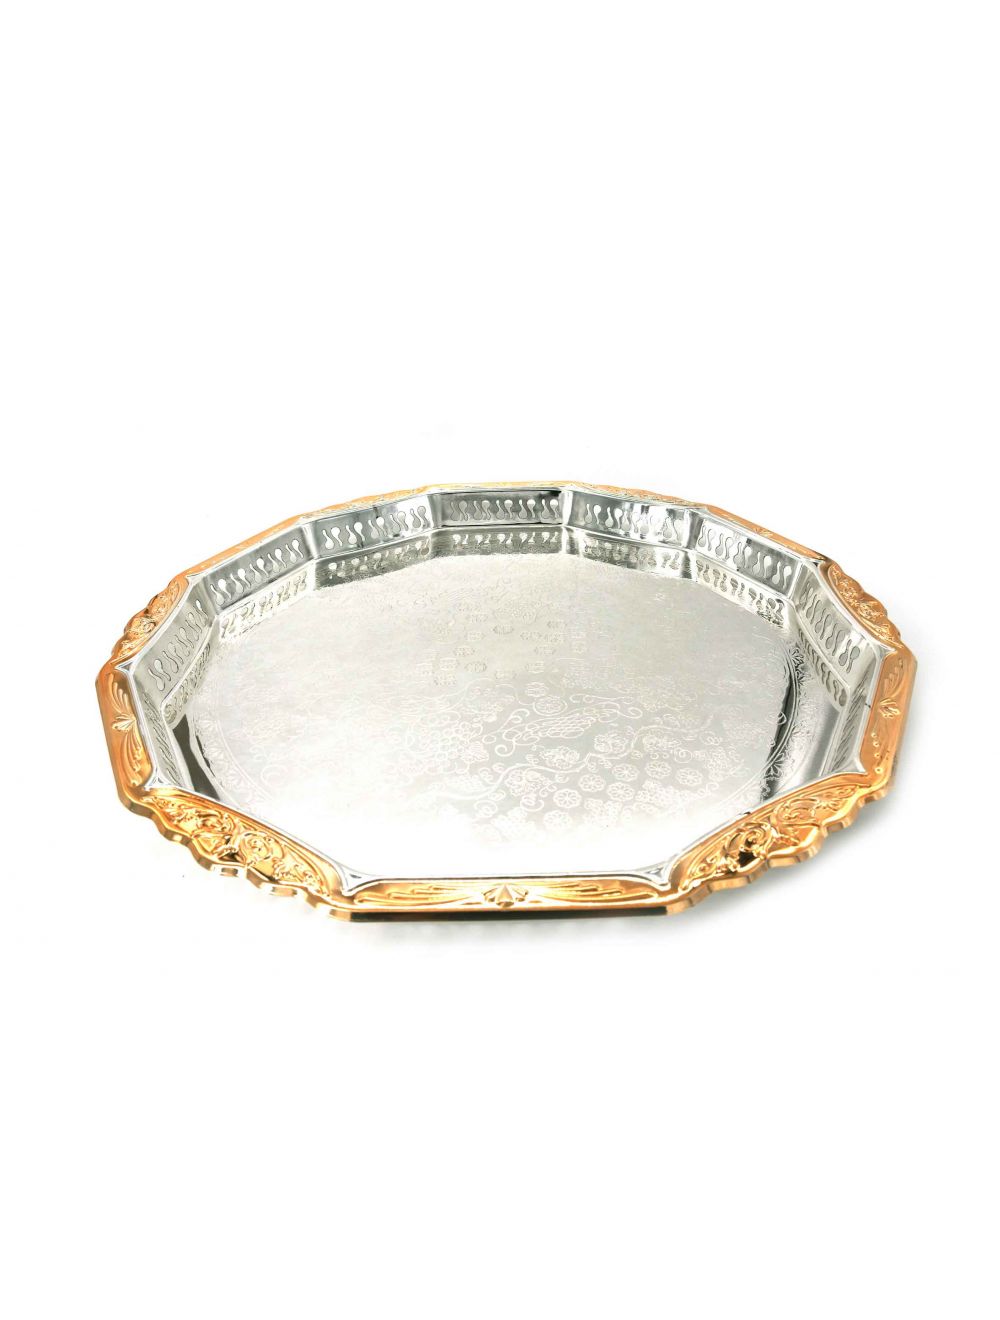 Serving Tray Acrylic Silver and Gold Design